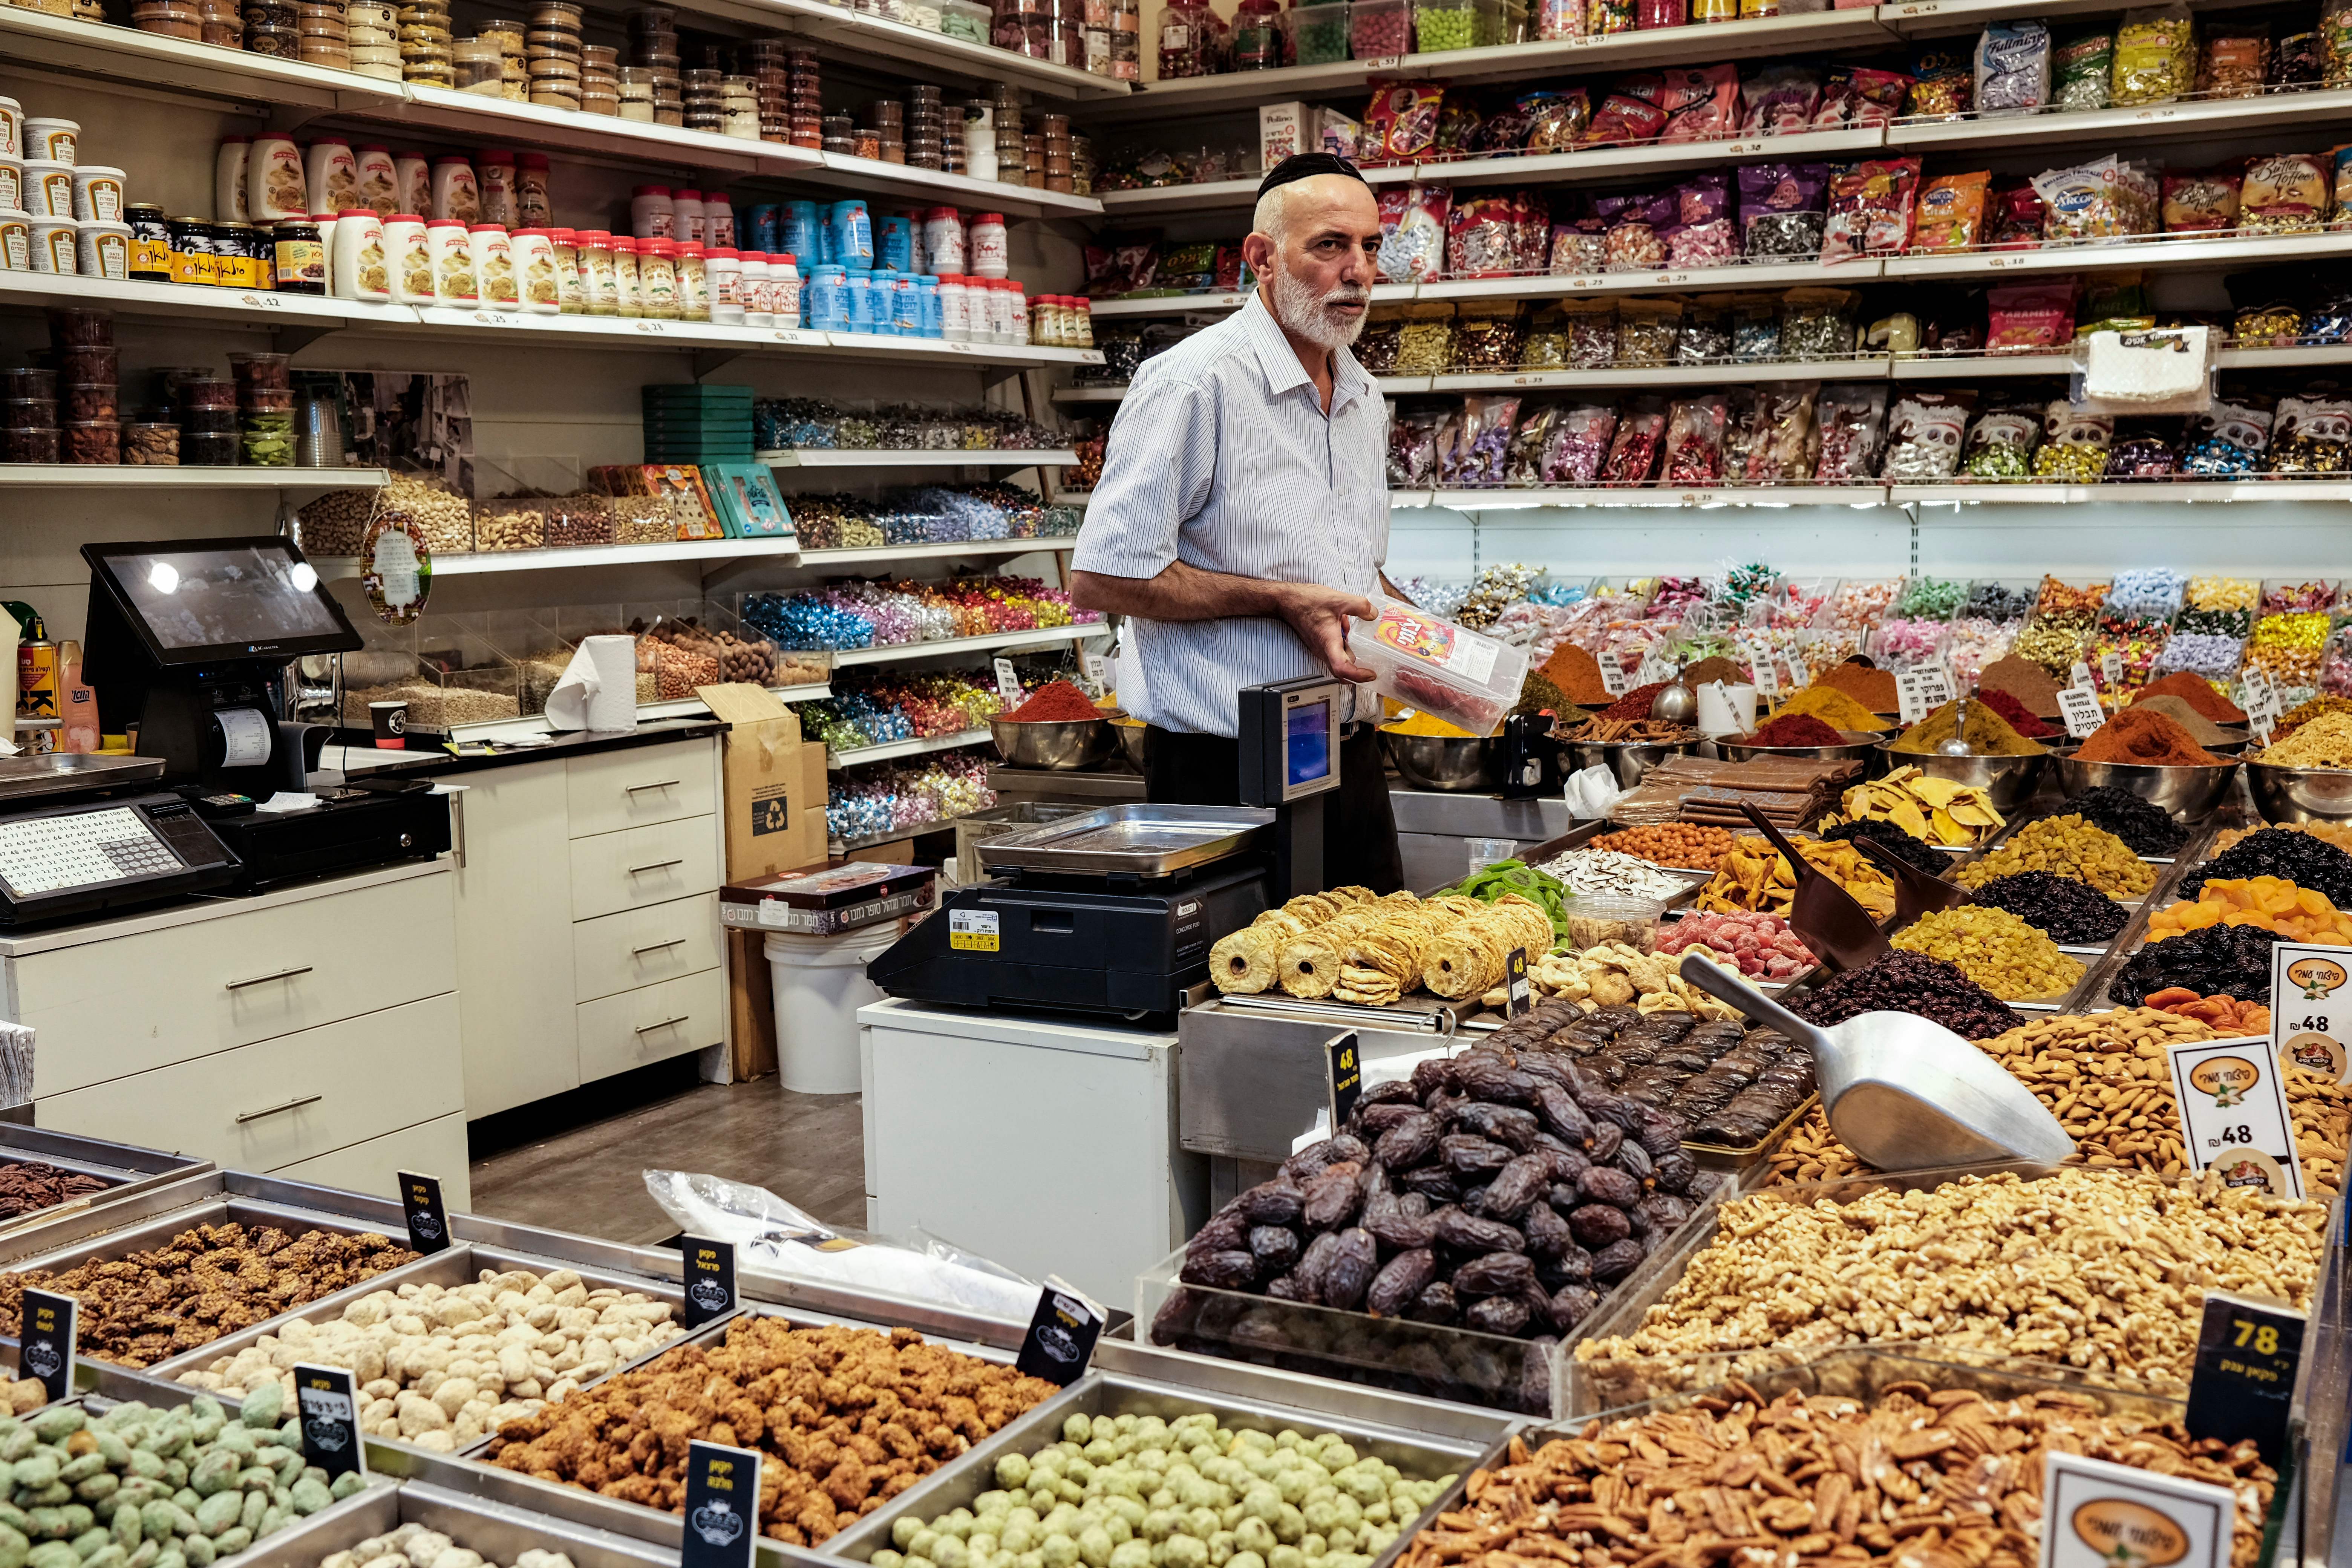 An Israeli man sells groceries at the Mahane Yehuda market in Jerusalem, on August 25, 2022. (Photo by RONALDO SCHEMIDT / AFP) (Photo by RONALDO SCHEMIDT/AFP via Getty Images)